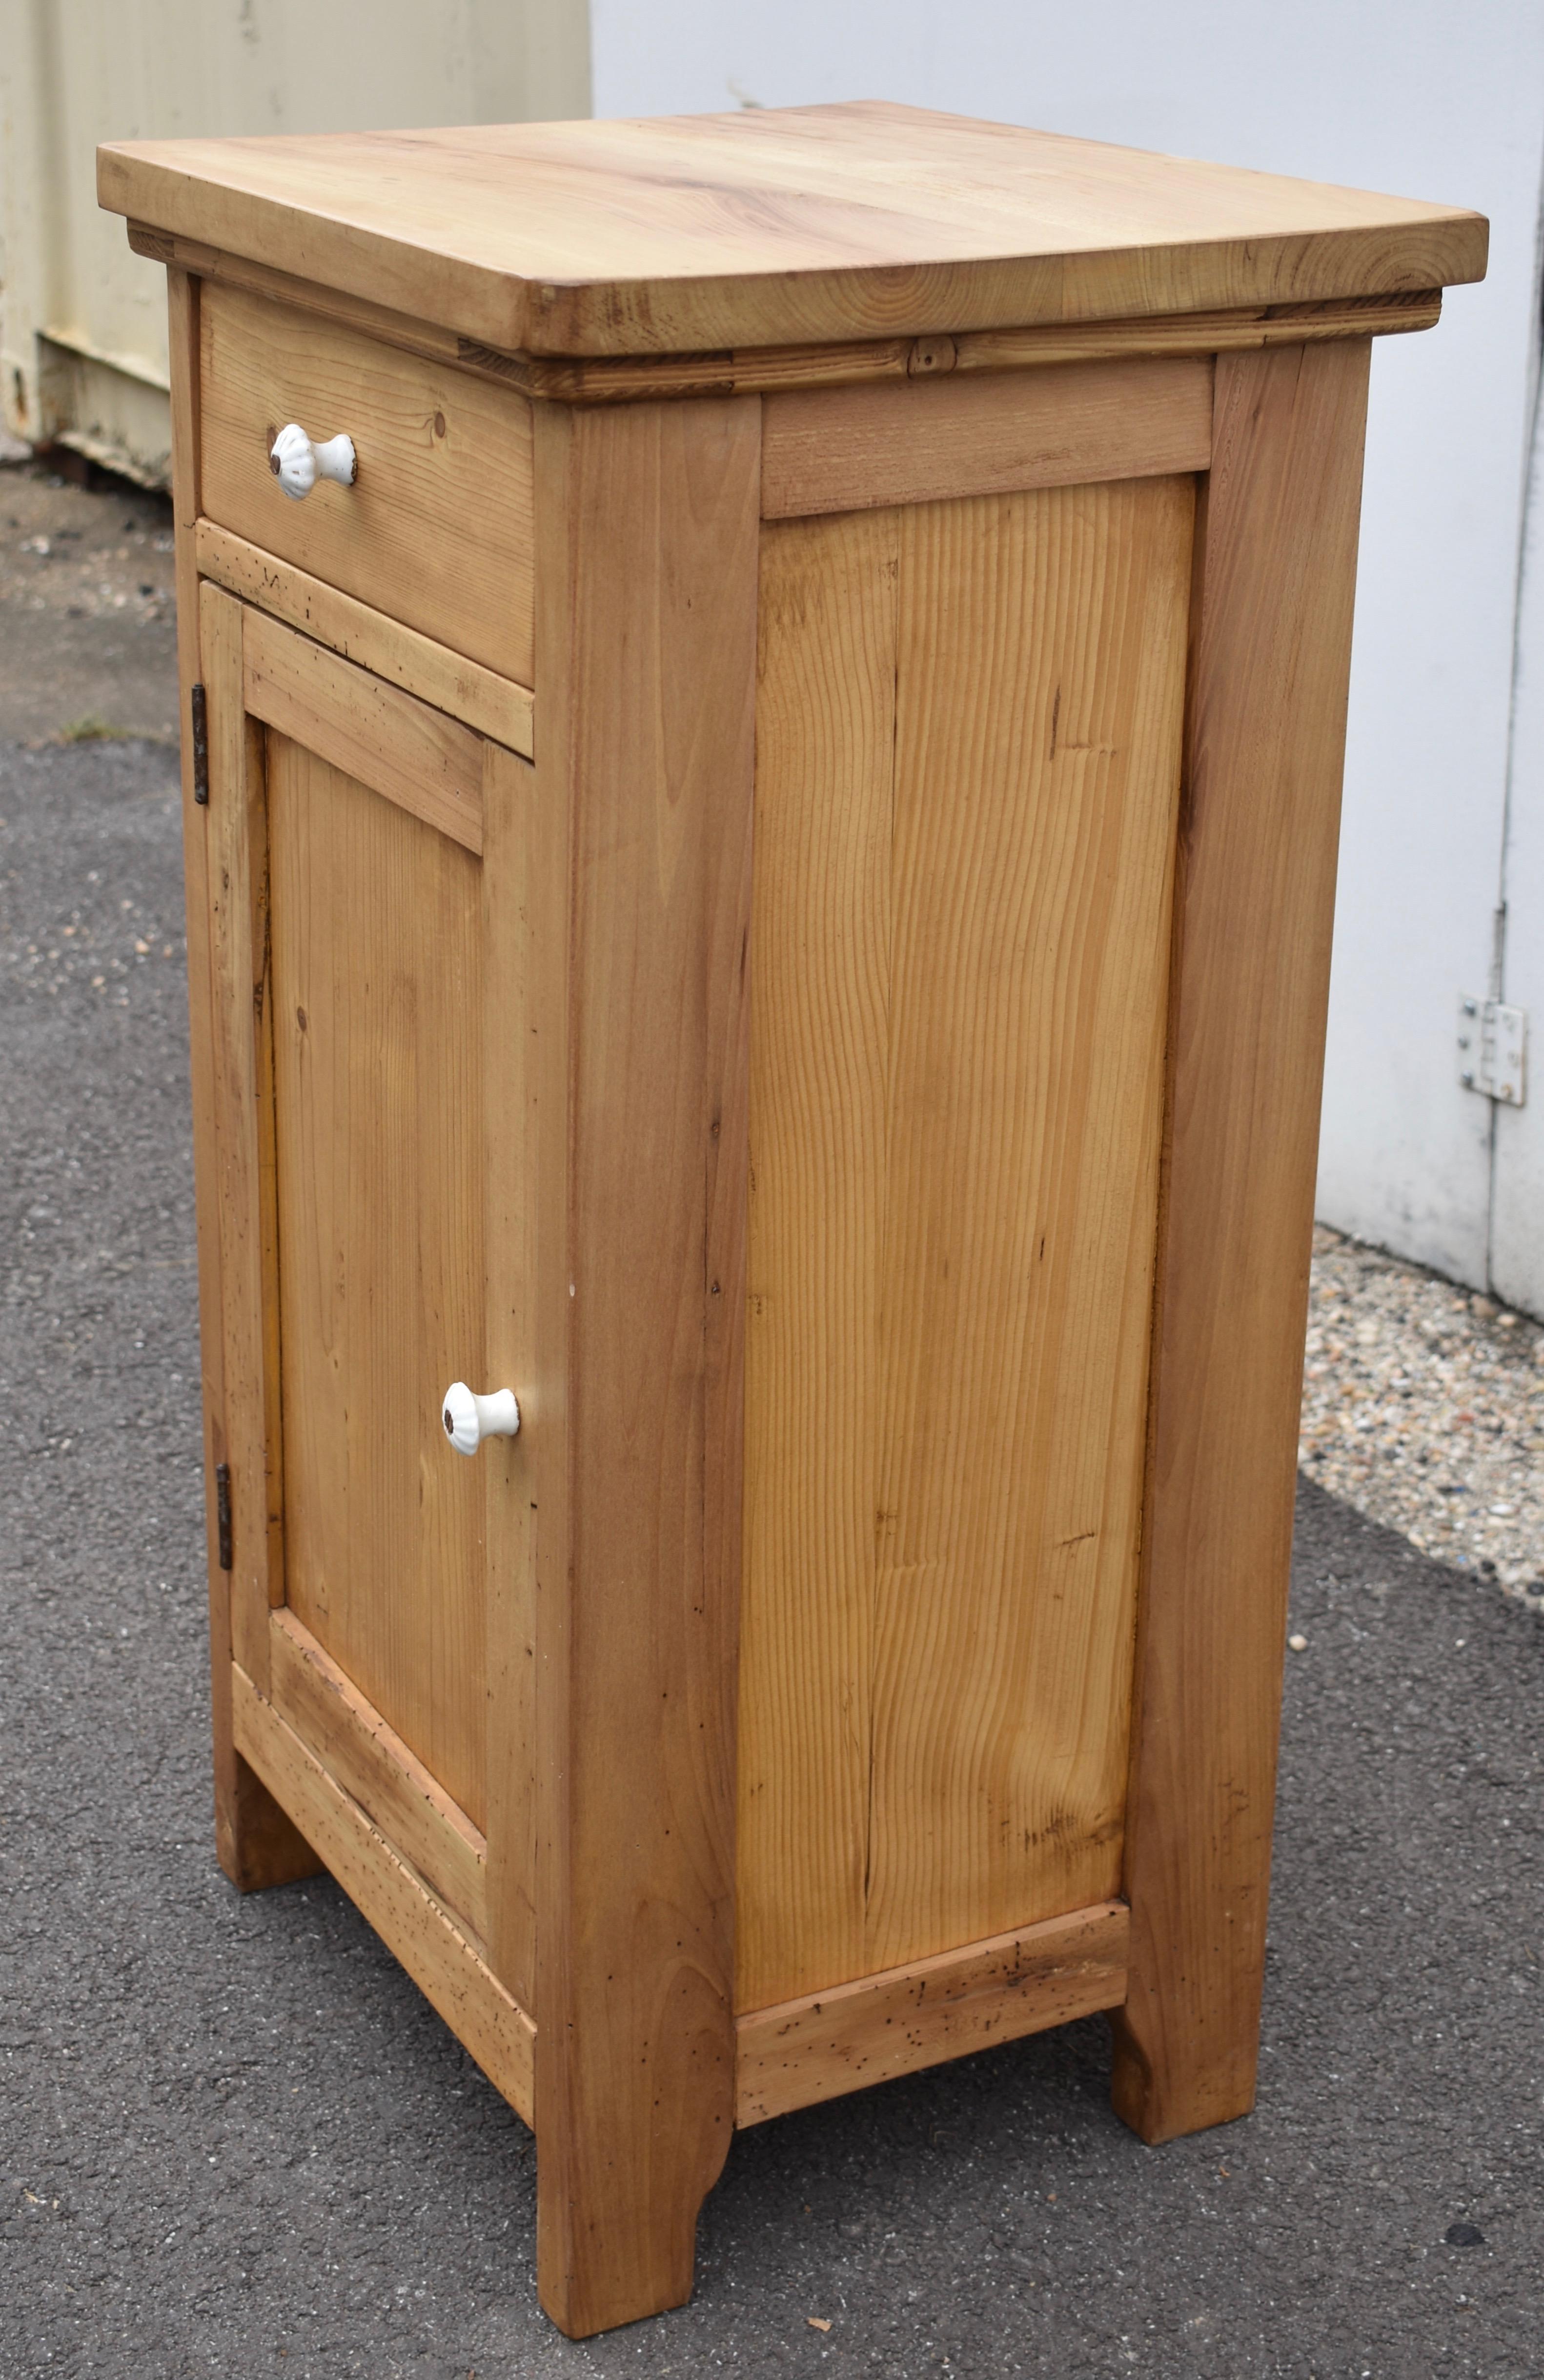 Polished Pine and Beech Nightstand with One Door and One Drawer